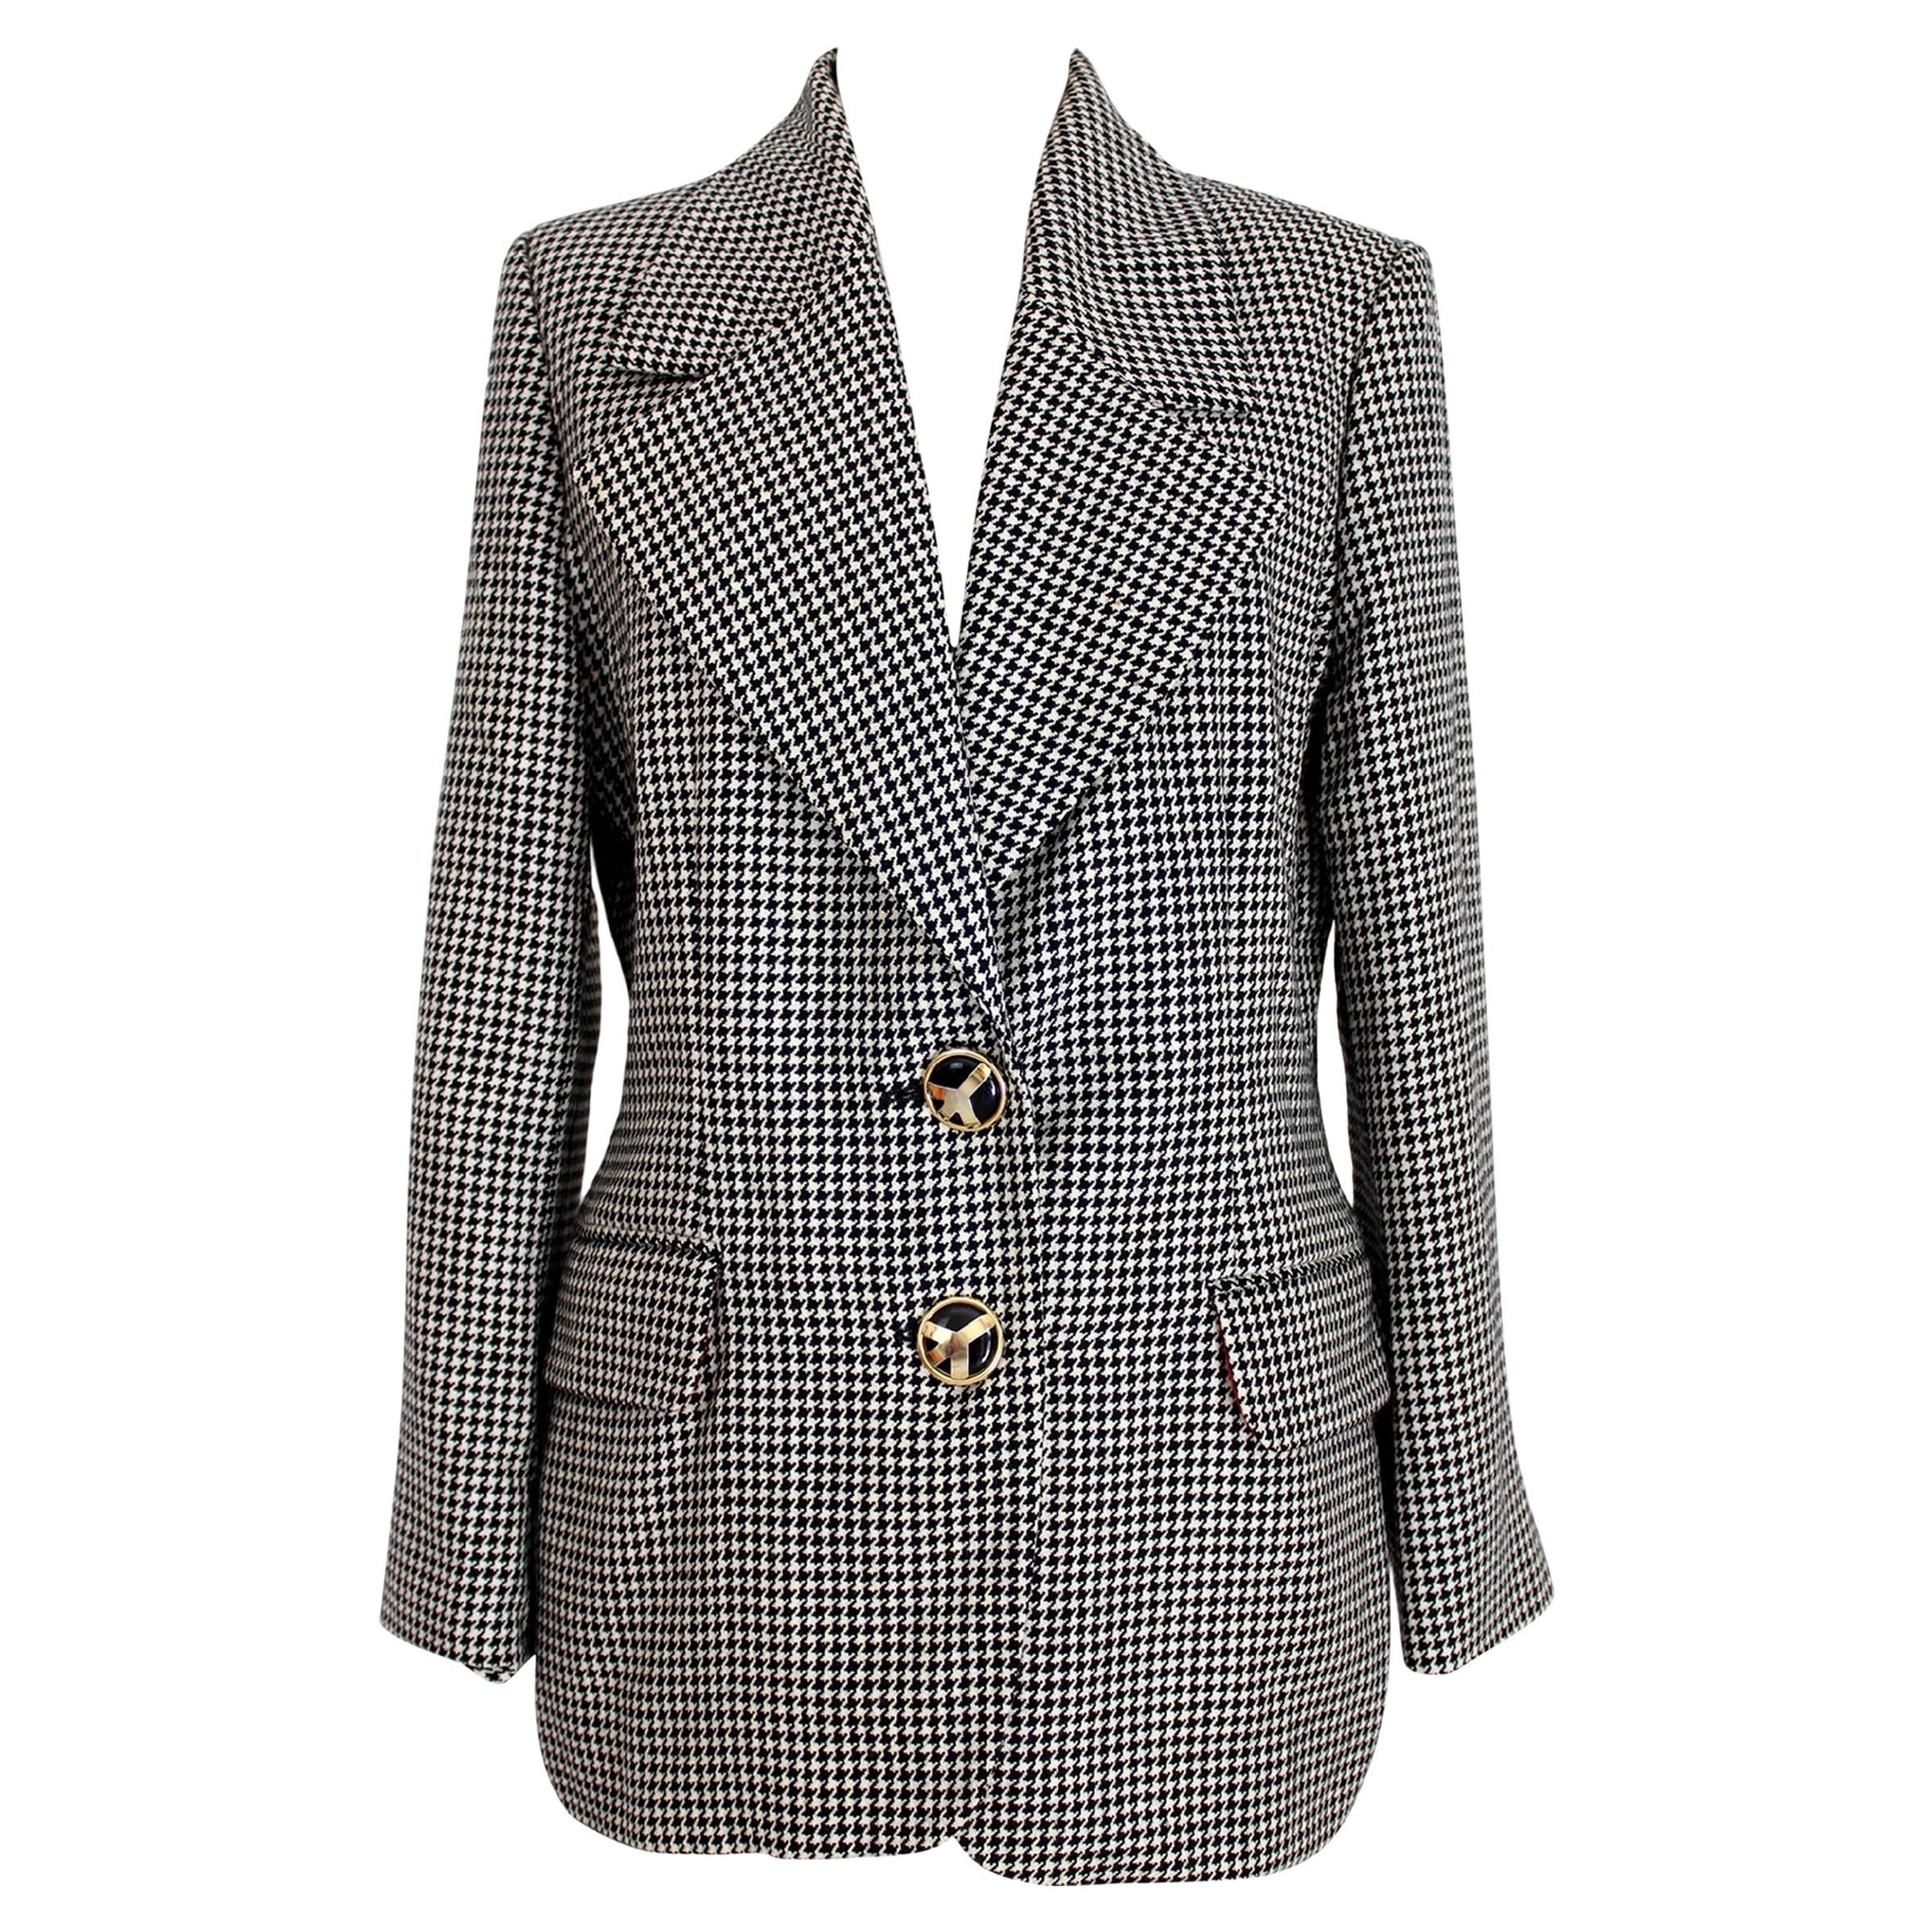 1990s Moschino Black and White Pied de Poule Houndstooth Wool Jacket